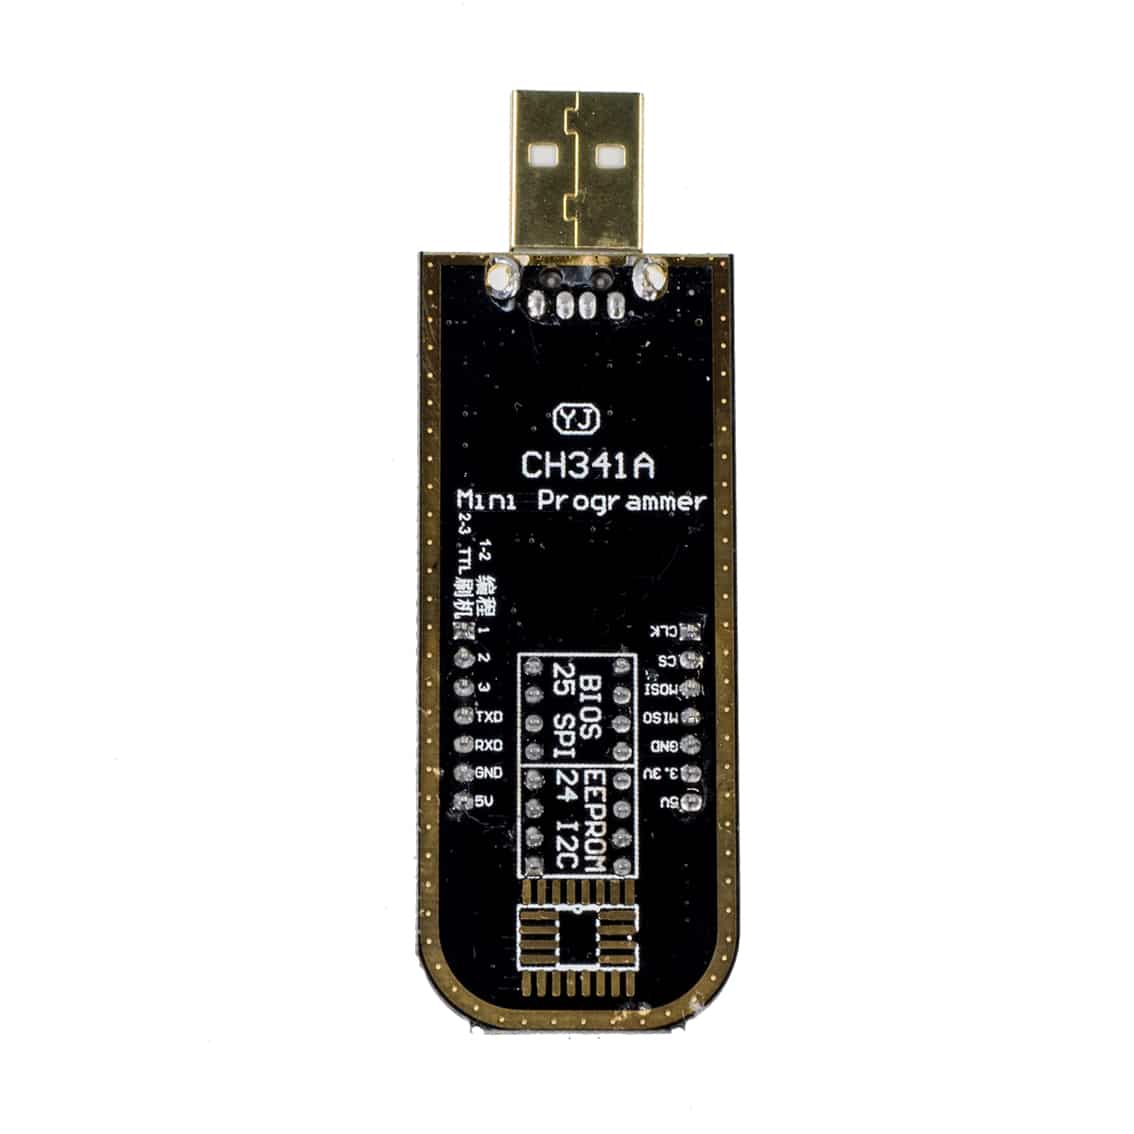 It is equipped with CH 341A chip, can automatically recognize 25 series chi...